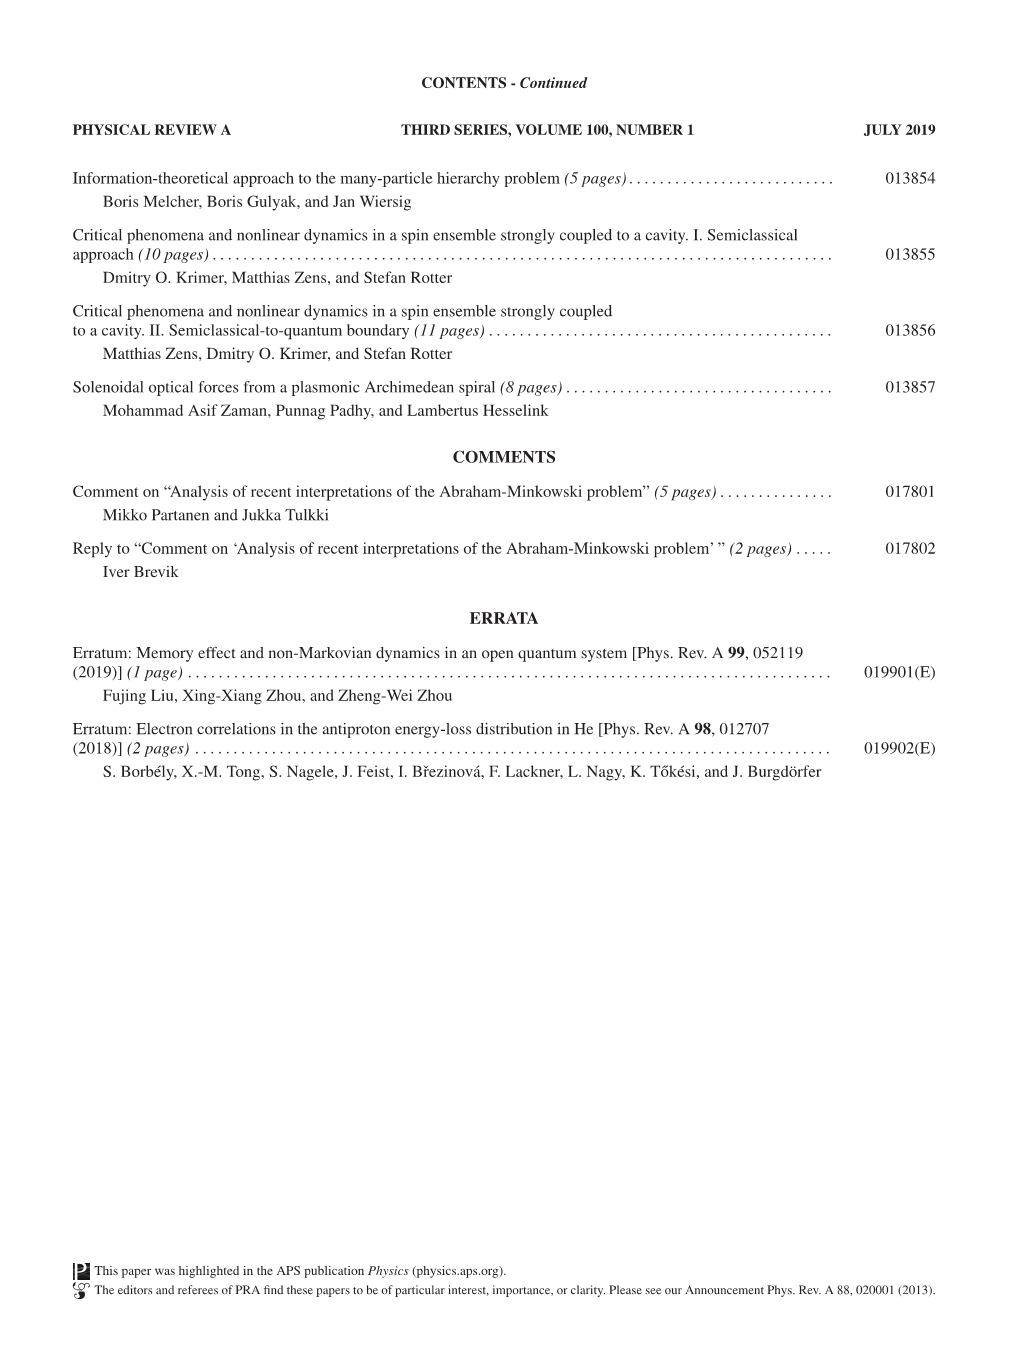 Table of Contents (Print, Part 2)